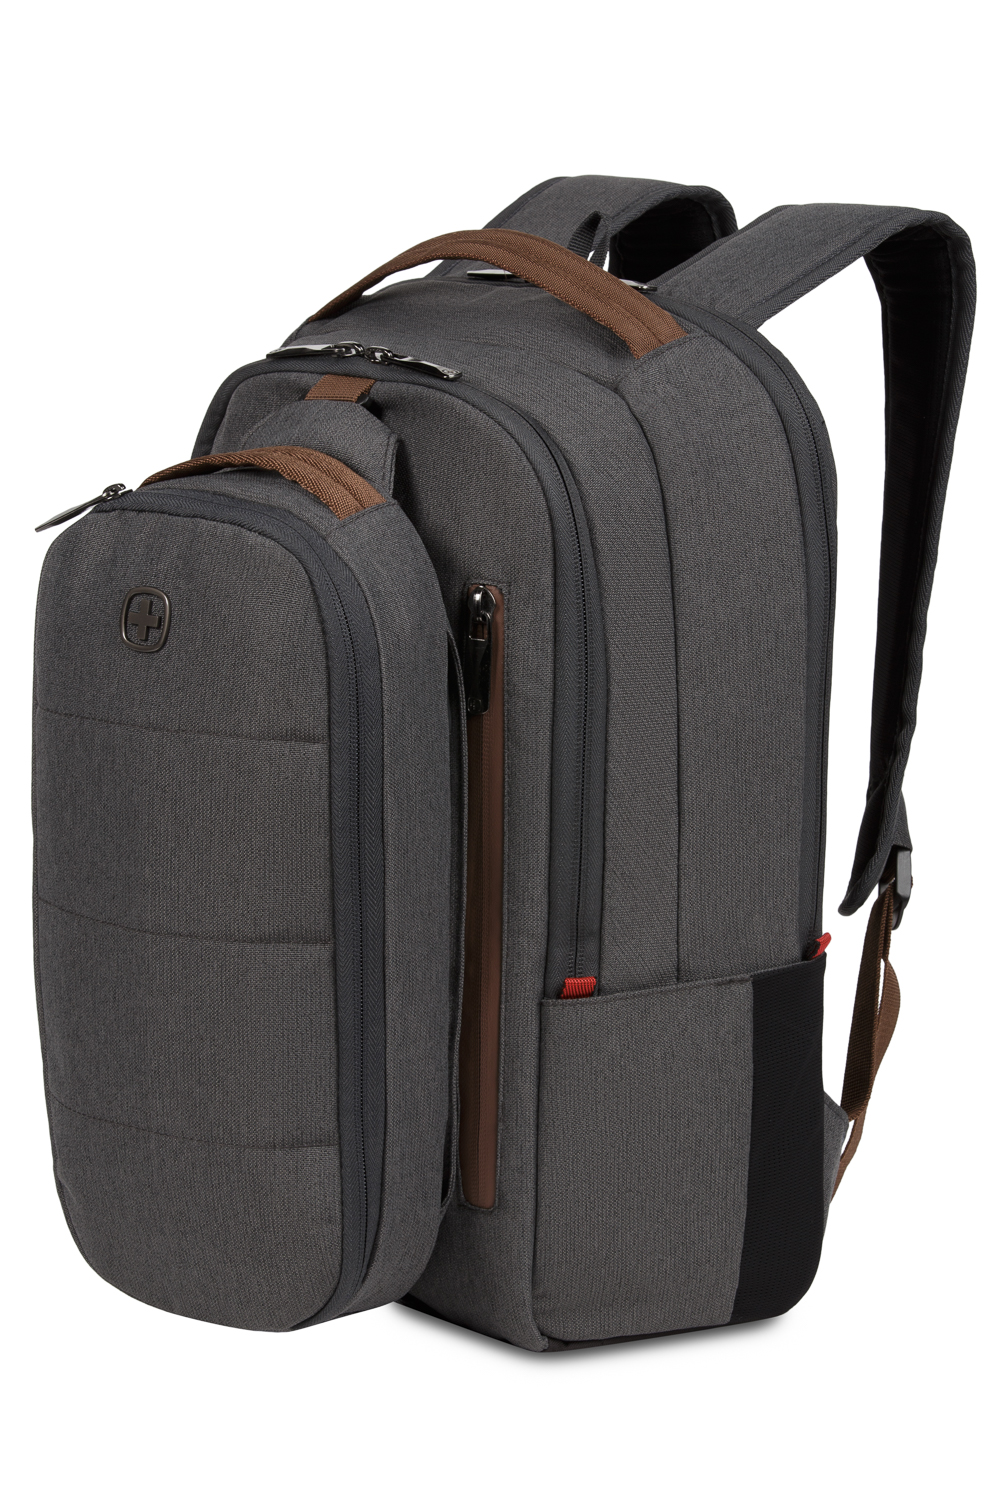 16 Upgrade Laptop Bag Wenger / Combo City Gray/Brown Day Crossbody Backpack -